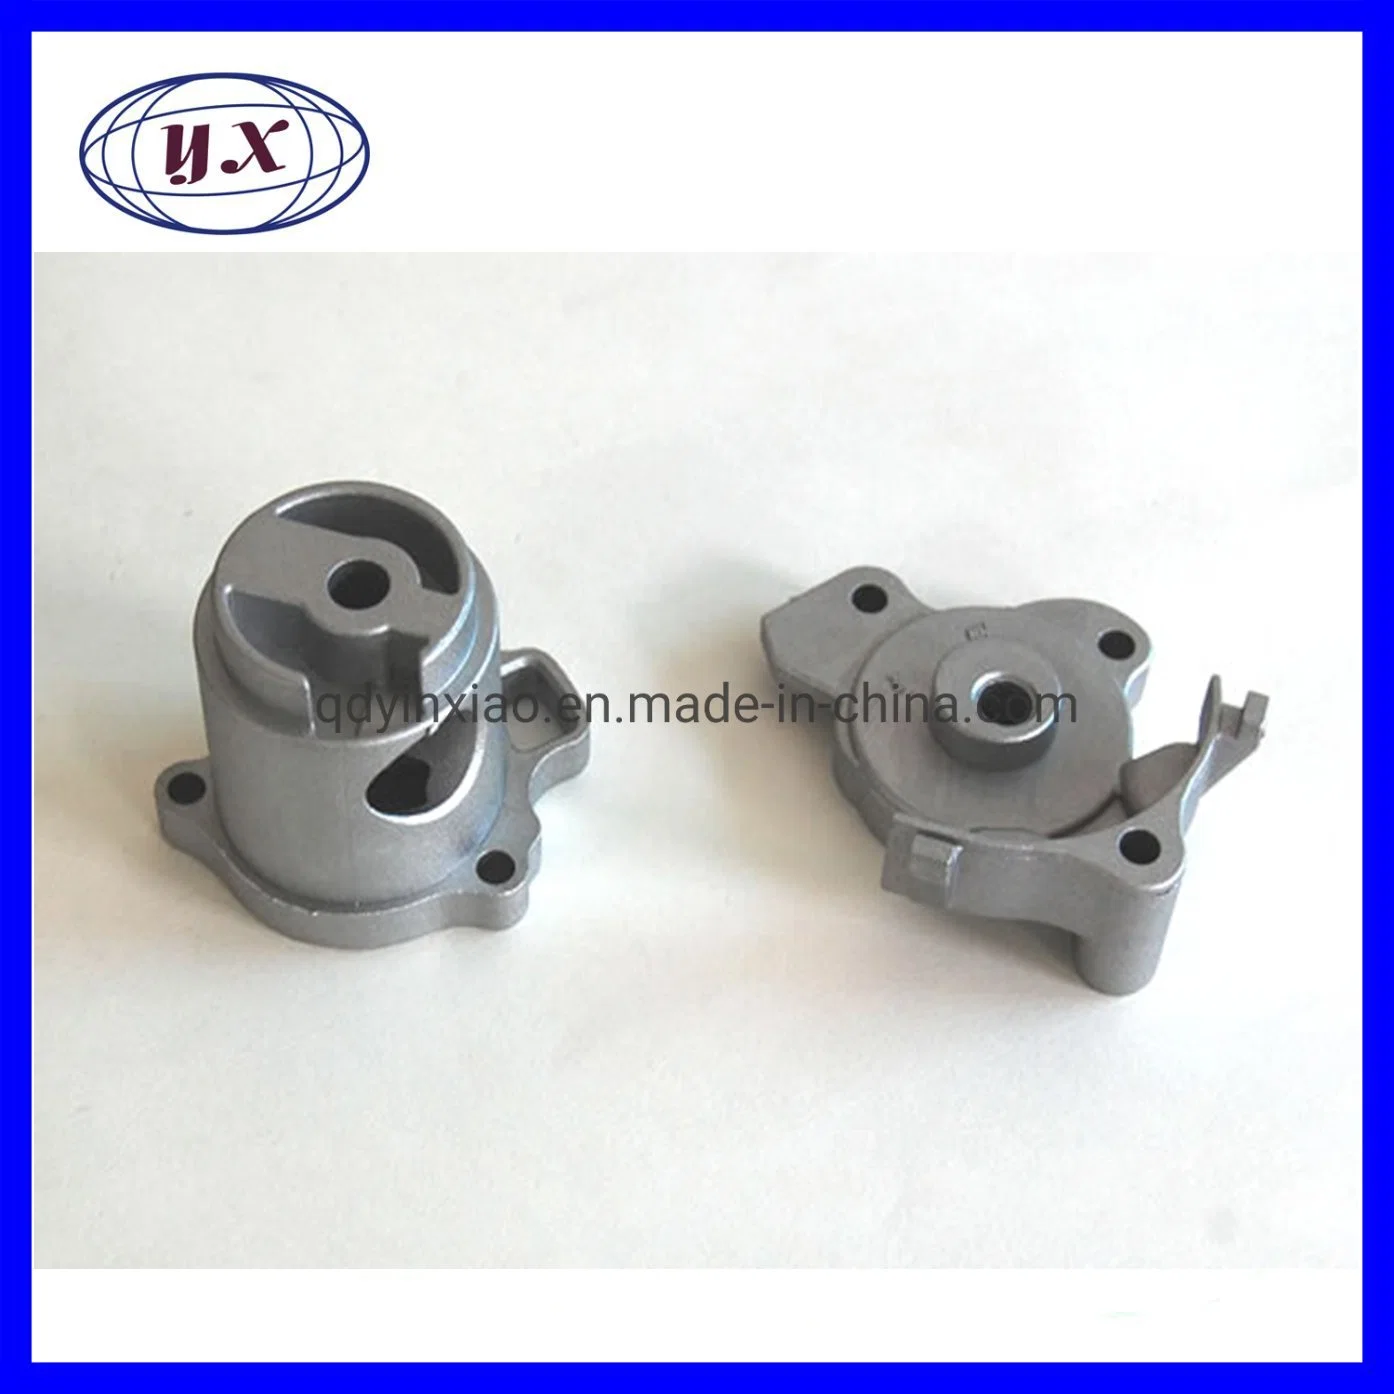 Factory Aluminum Aluminium Alloy Casting and CNC Machining for Auto Products Motorcycle Part